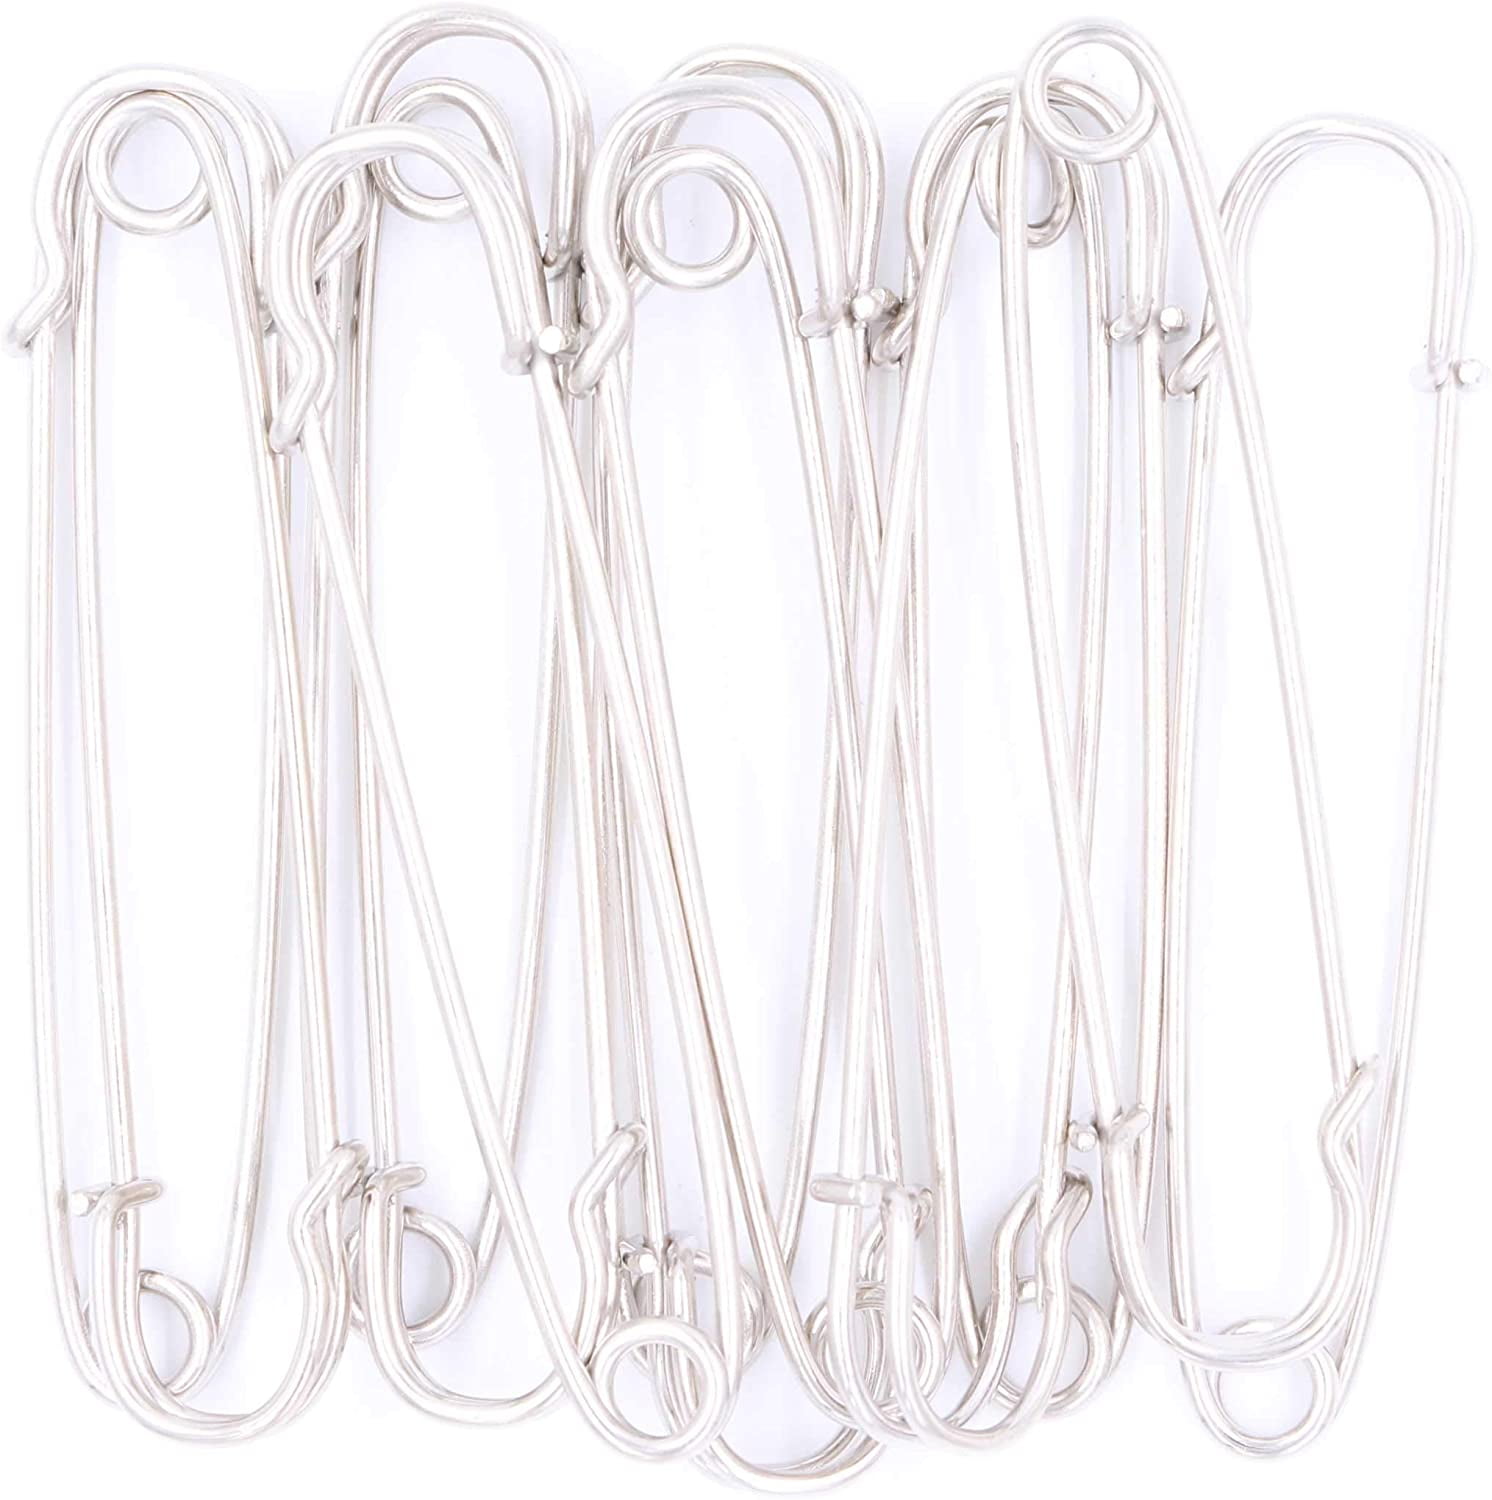 Wuuycoky White 100mm Length Large Safety Pin Safety Blanket Pin Pack of 10